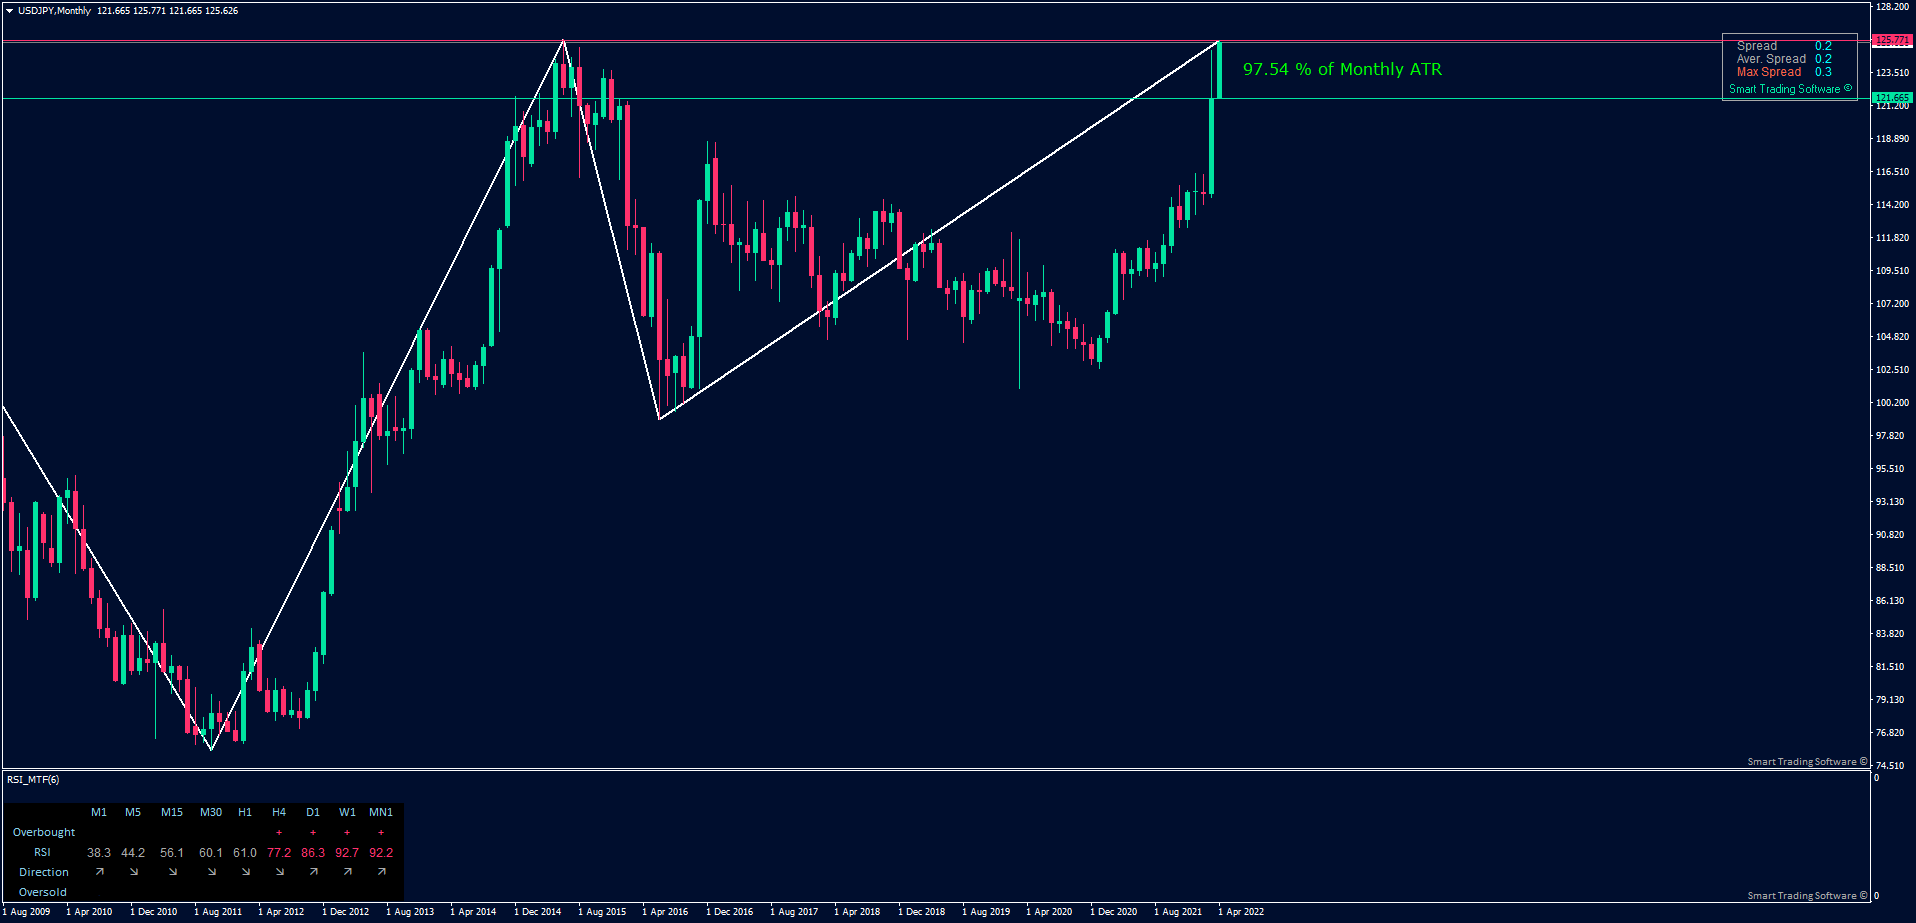 USD/JPY Monthly chart